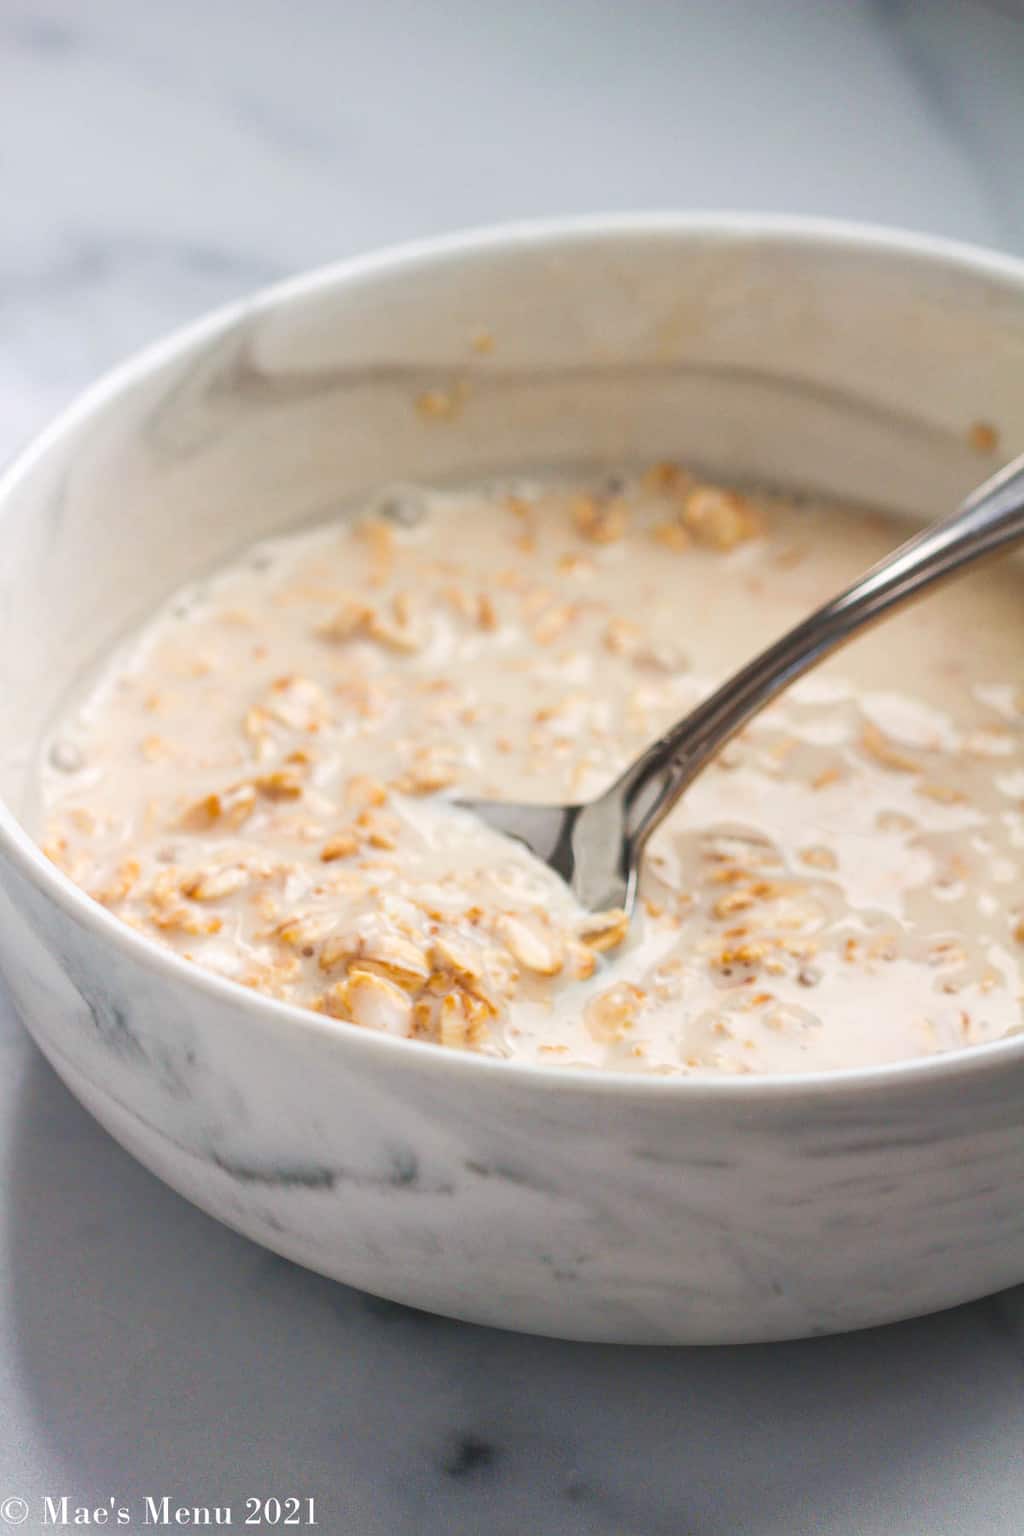 An up-close shot of a bowl of overnight oats with a spoon in it